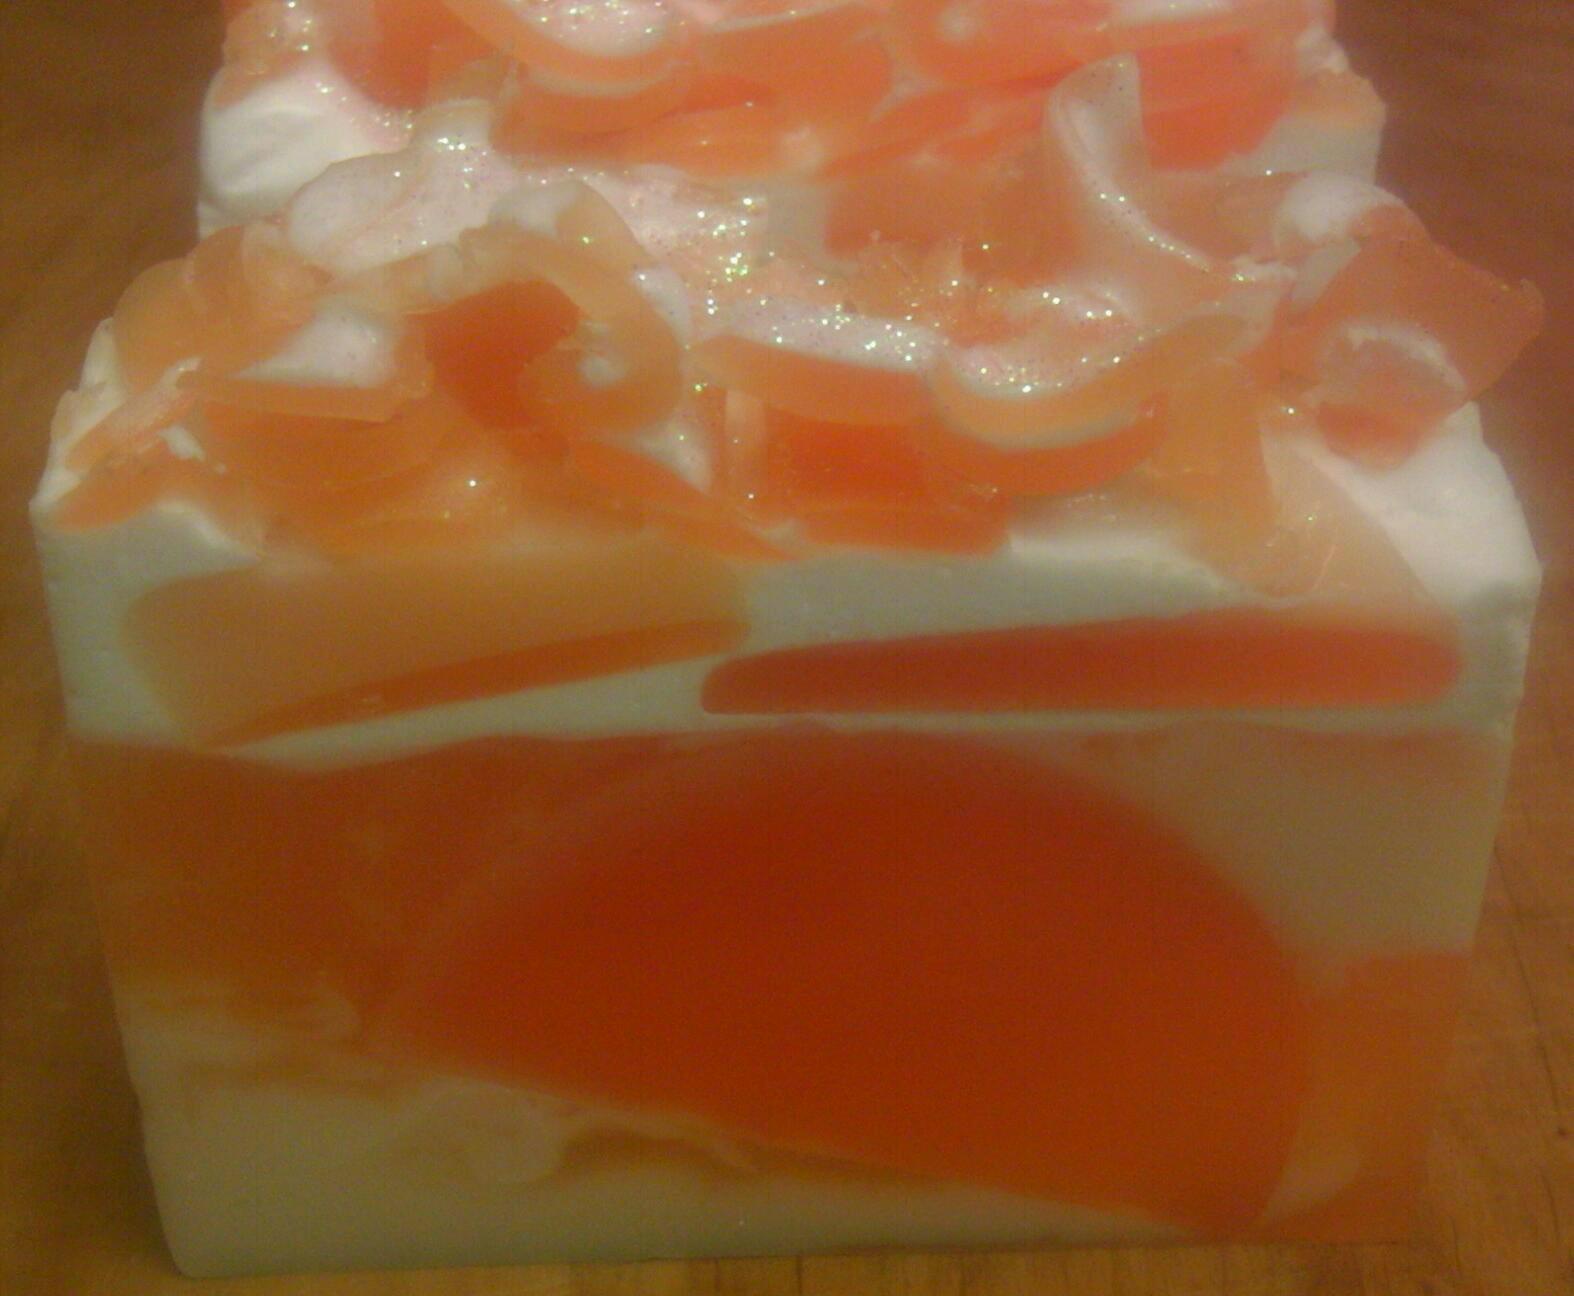 orange dream, dream cream, orange dream cream soap, orange soap, dream soap, melt and pour soap, glycerin soap, handmade soap, handcrafted soap